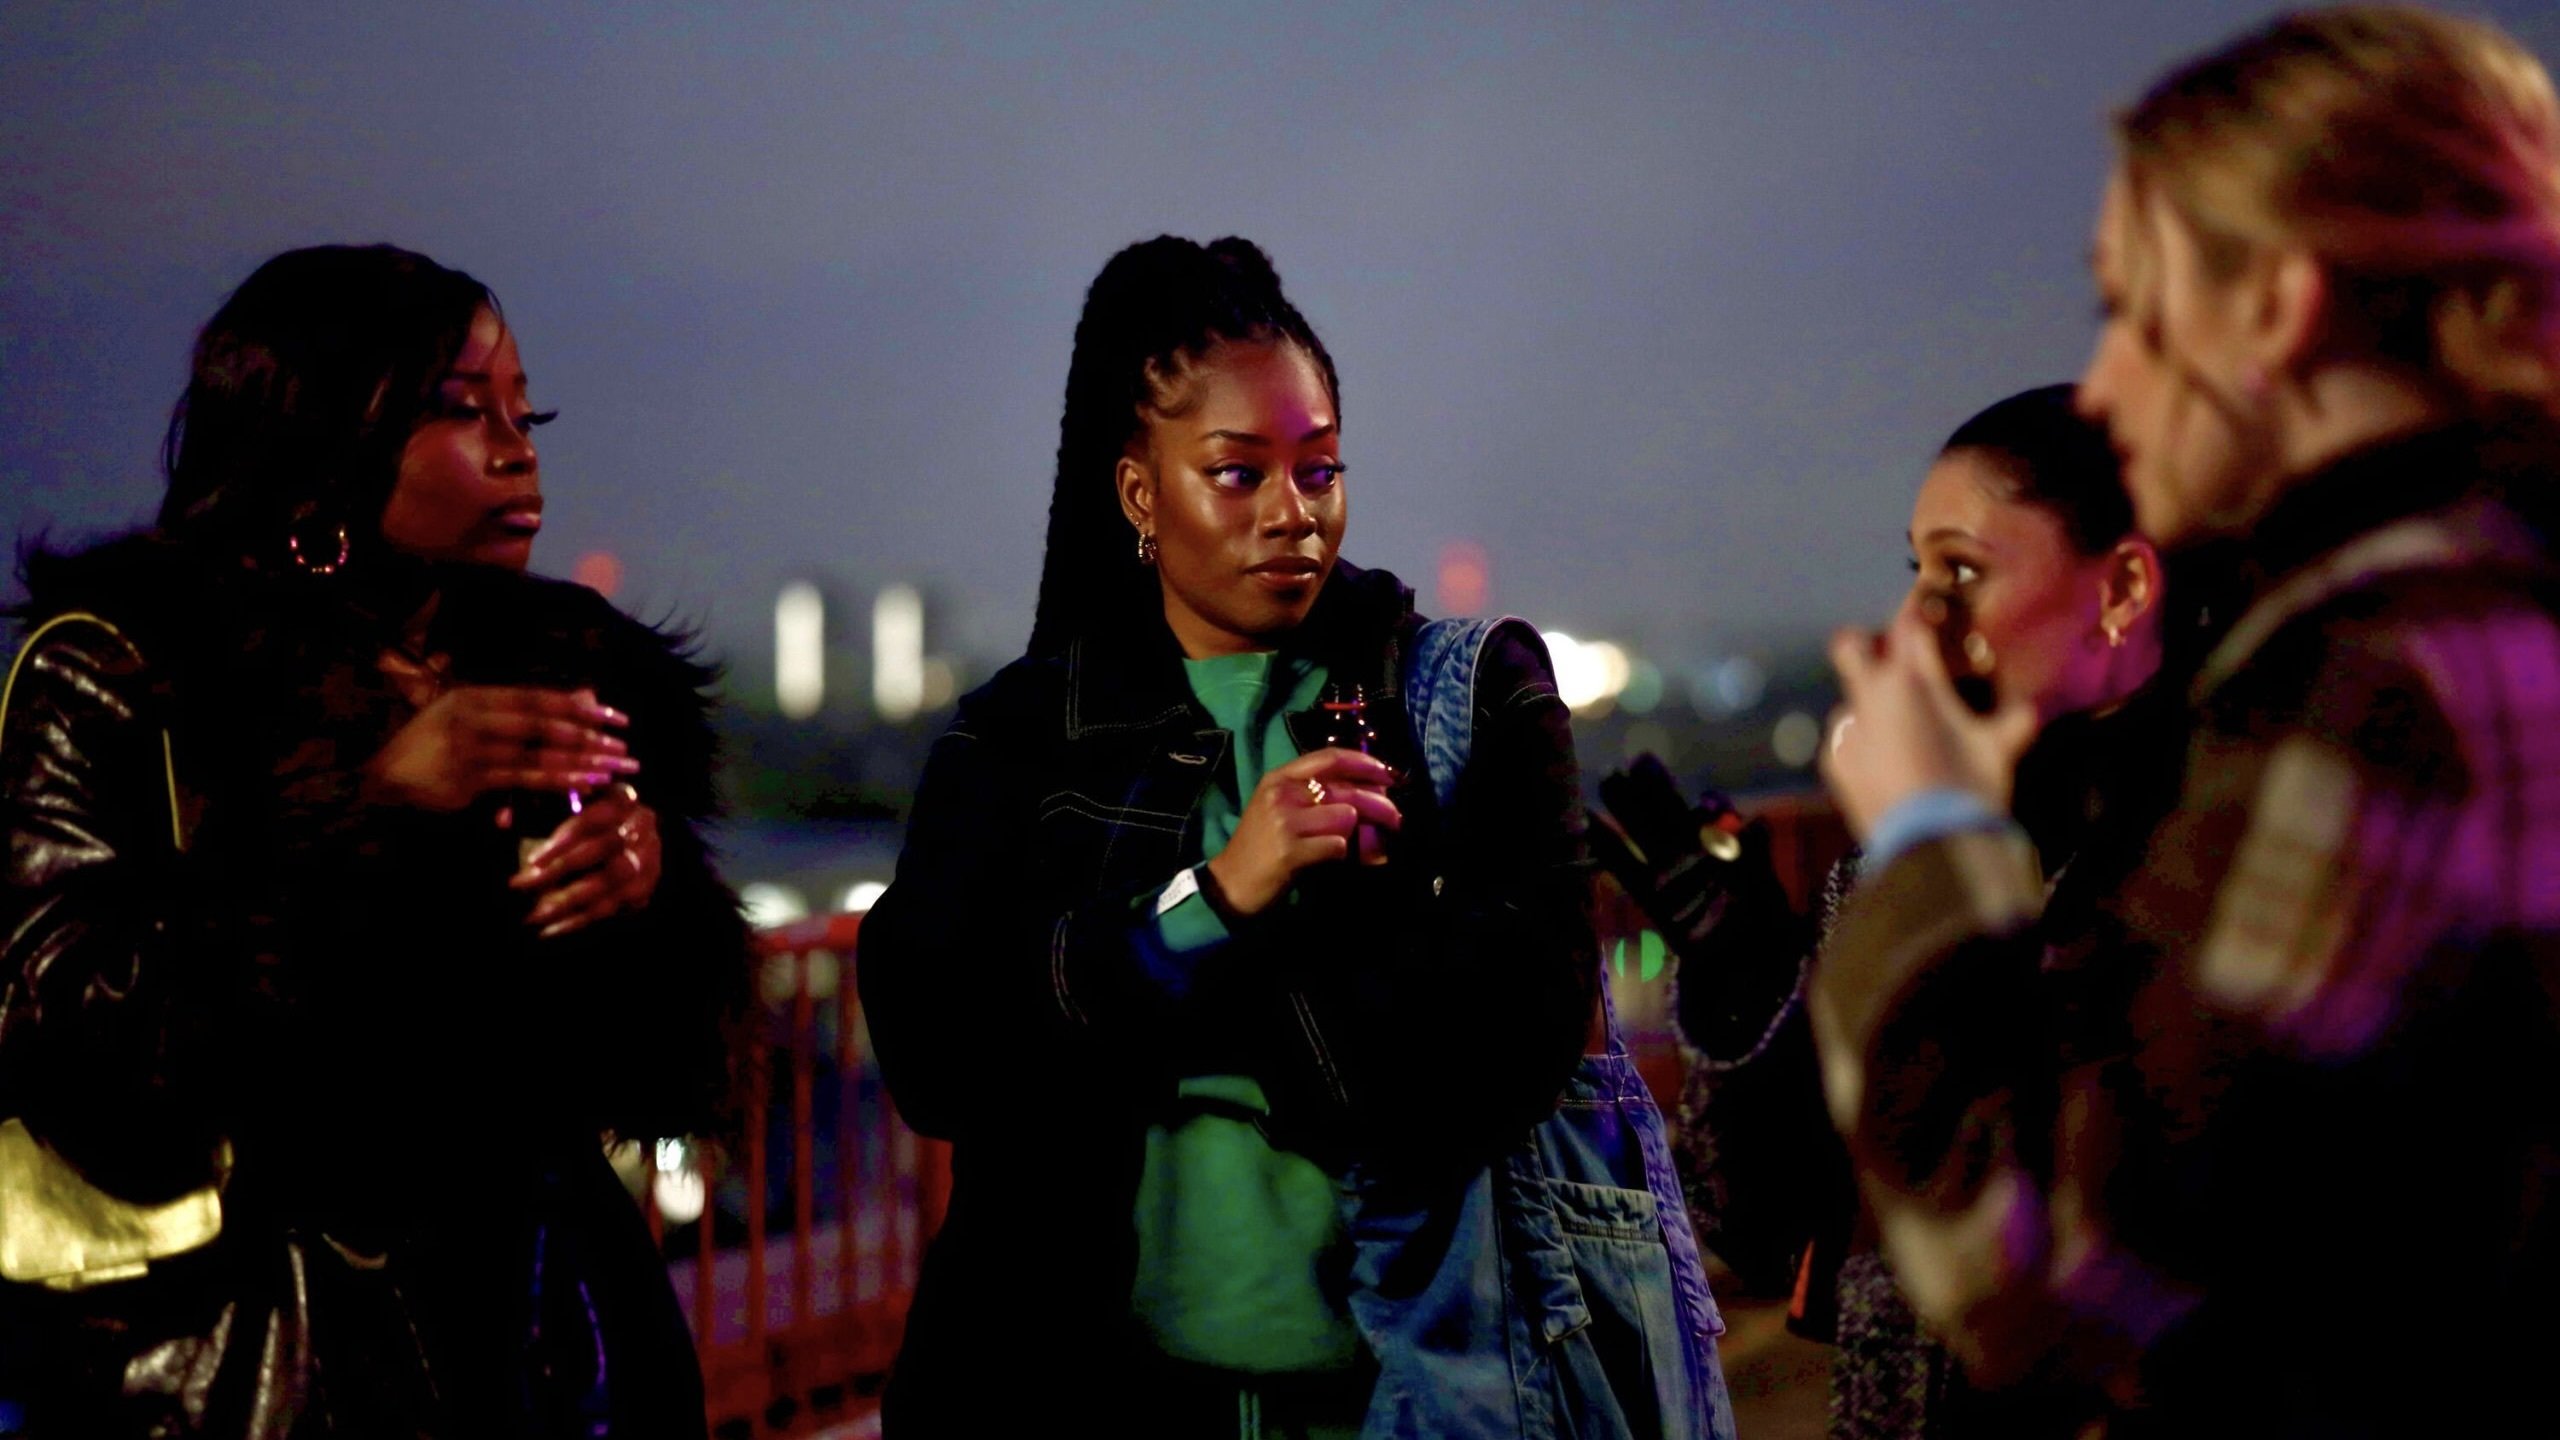 Four young woman at a rooftop party.